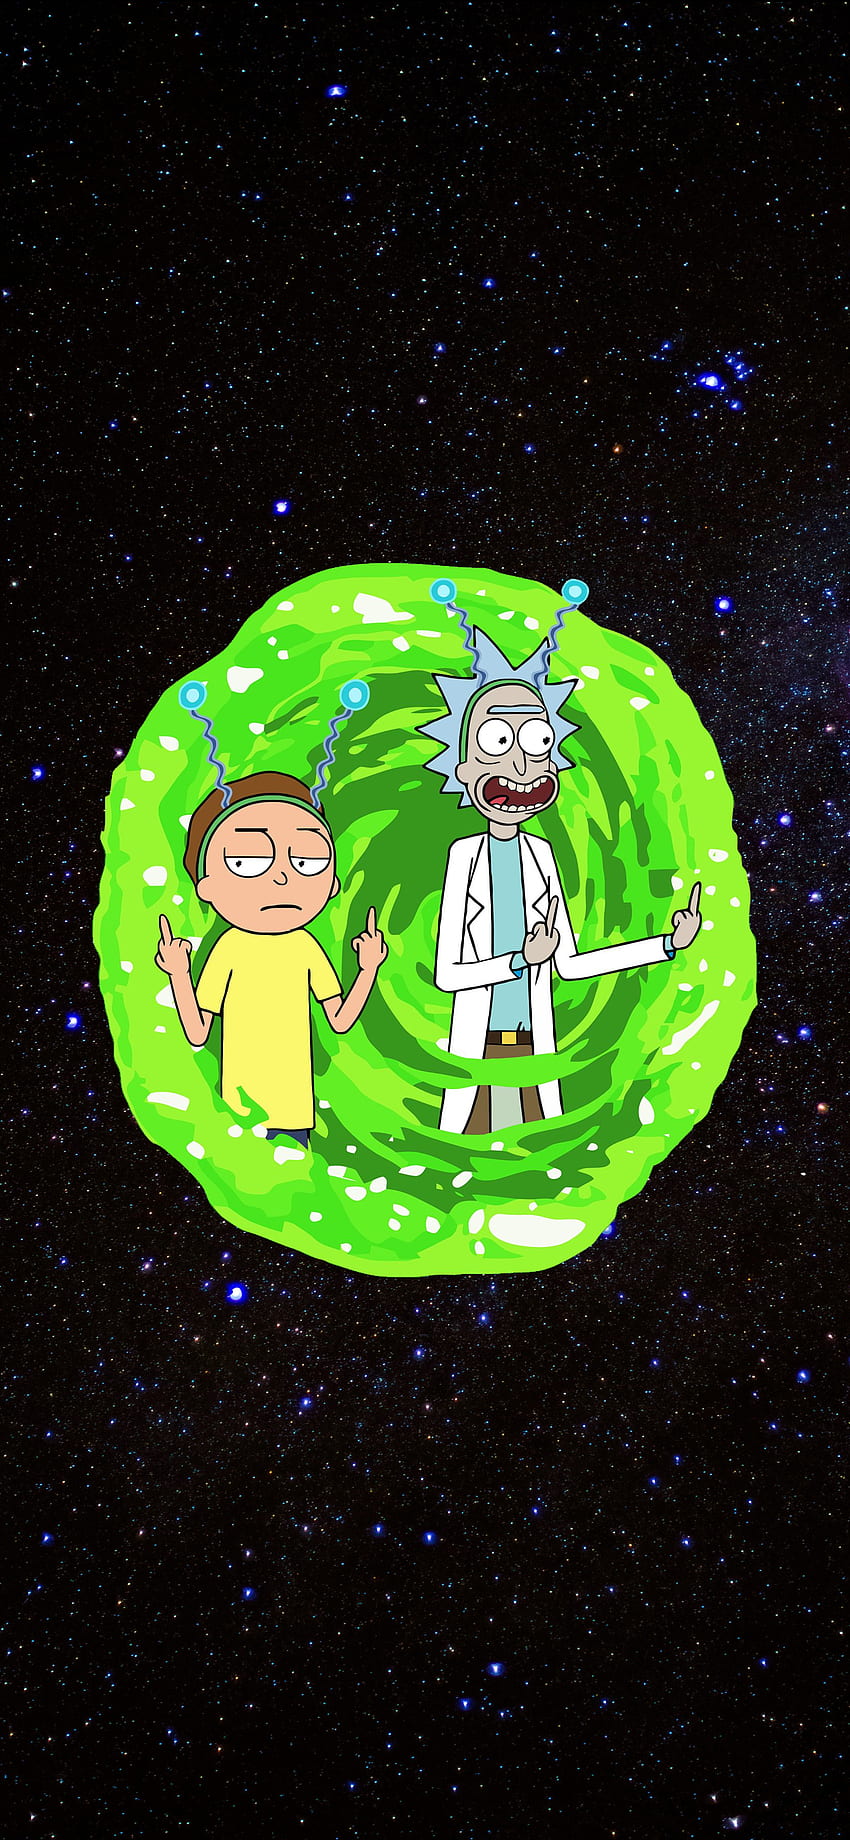 rick and morty in 2020. Rick and morty drawing, iPhone rick and morty, Rick and morty stickers, Rick and Morty Aesthetic HD phone wallpaper